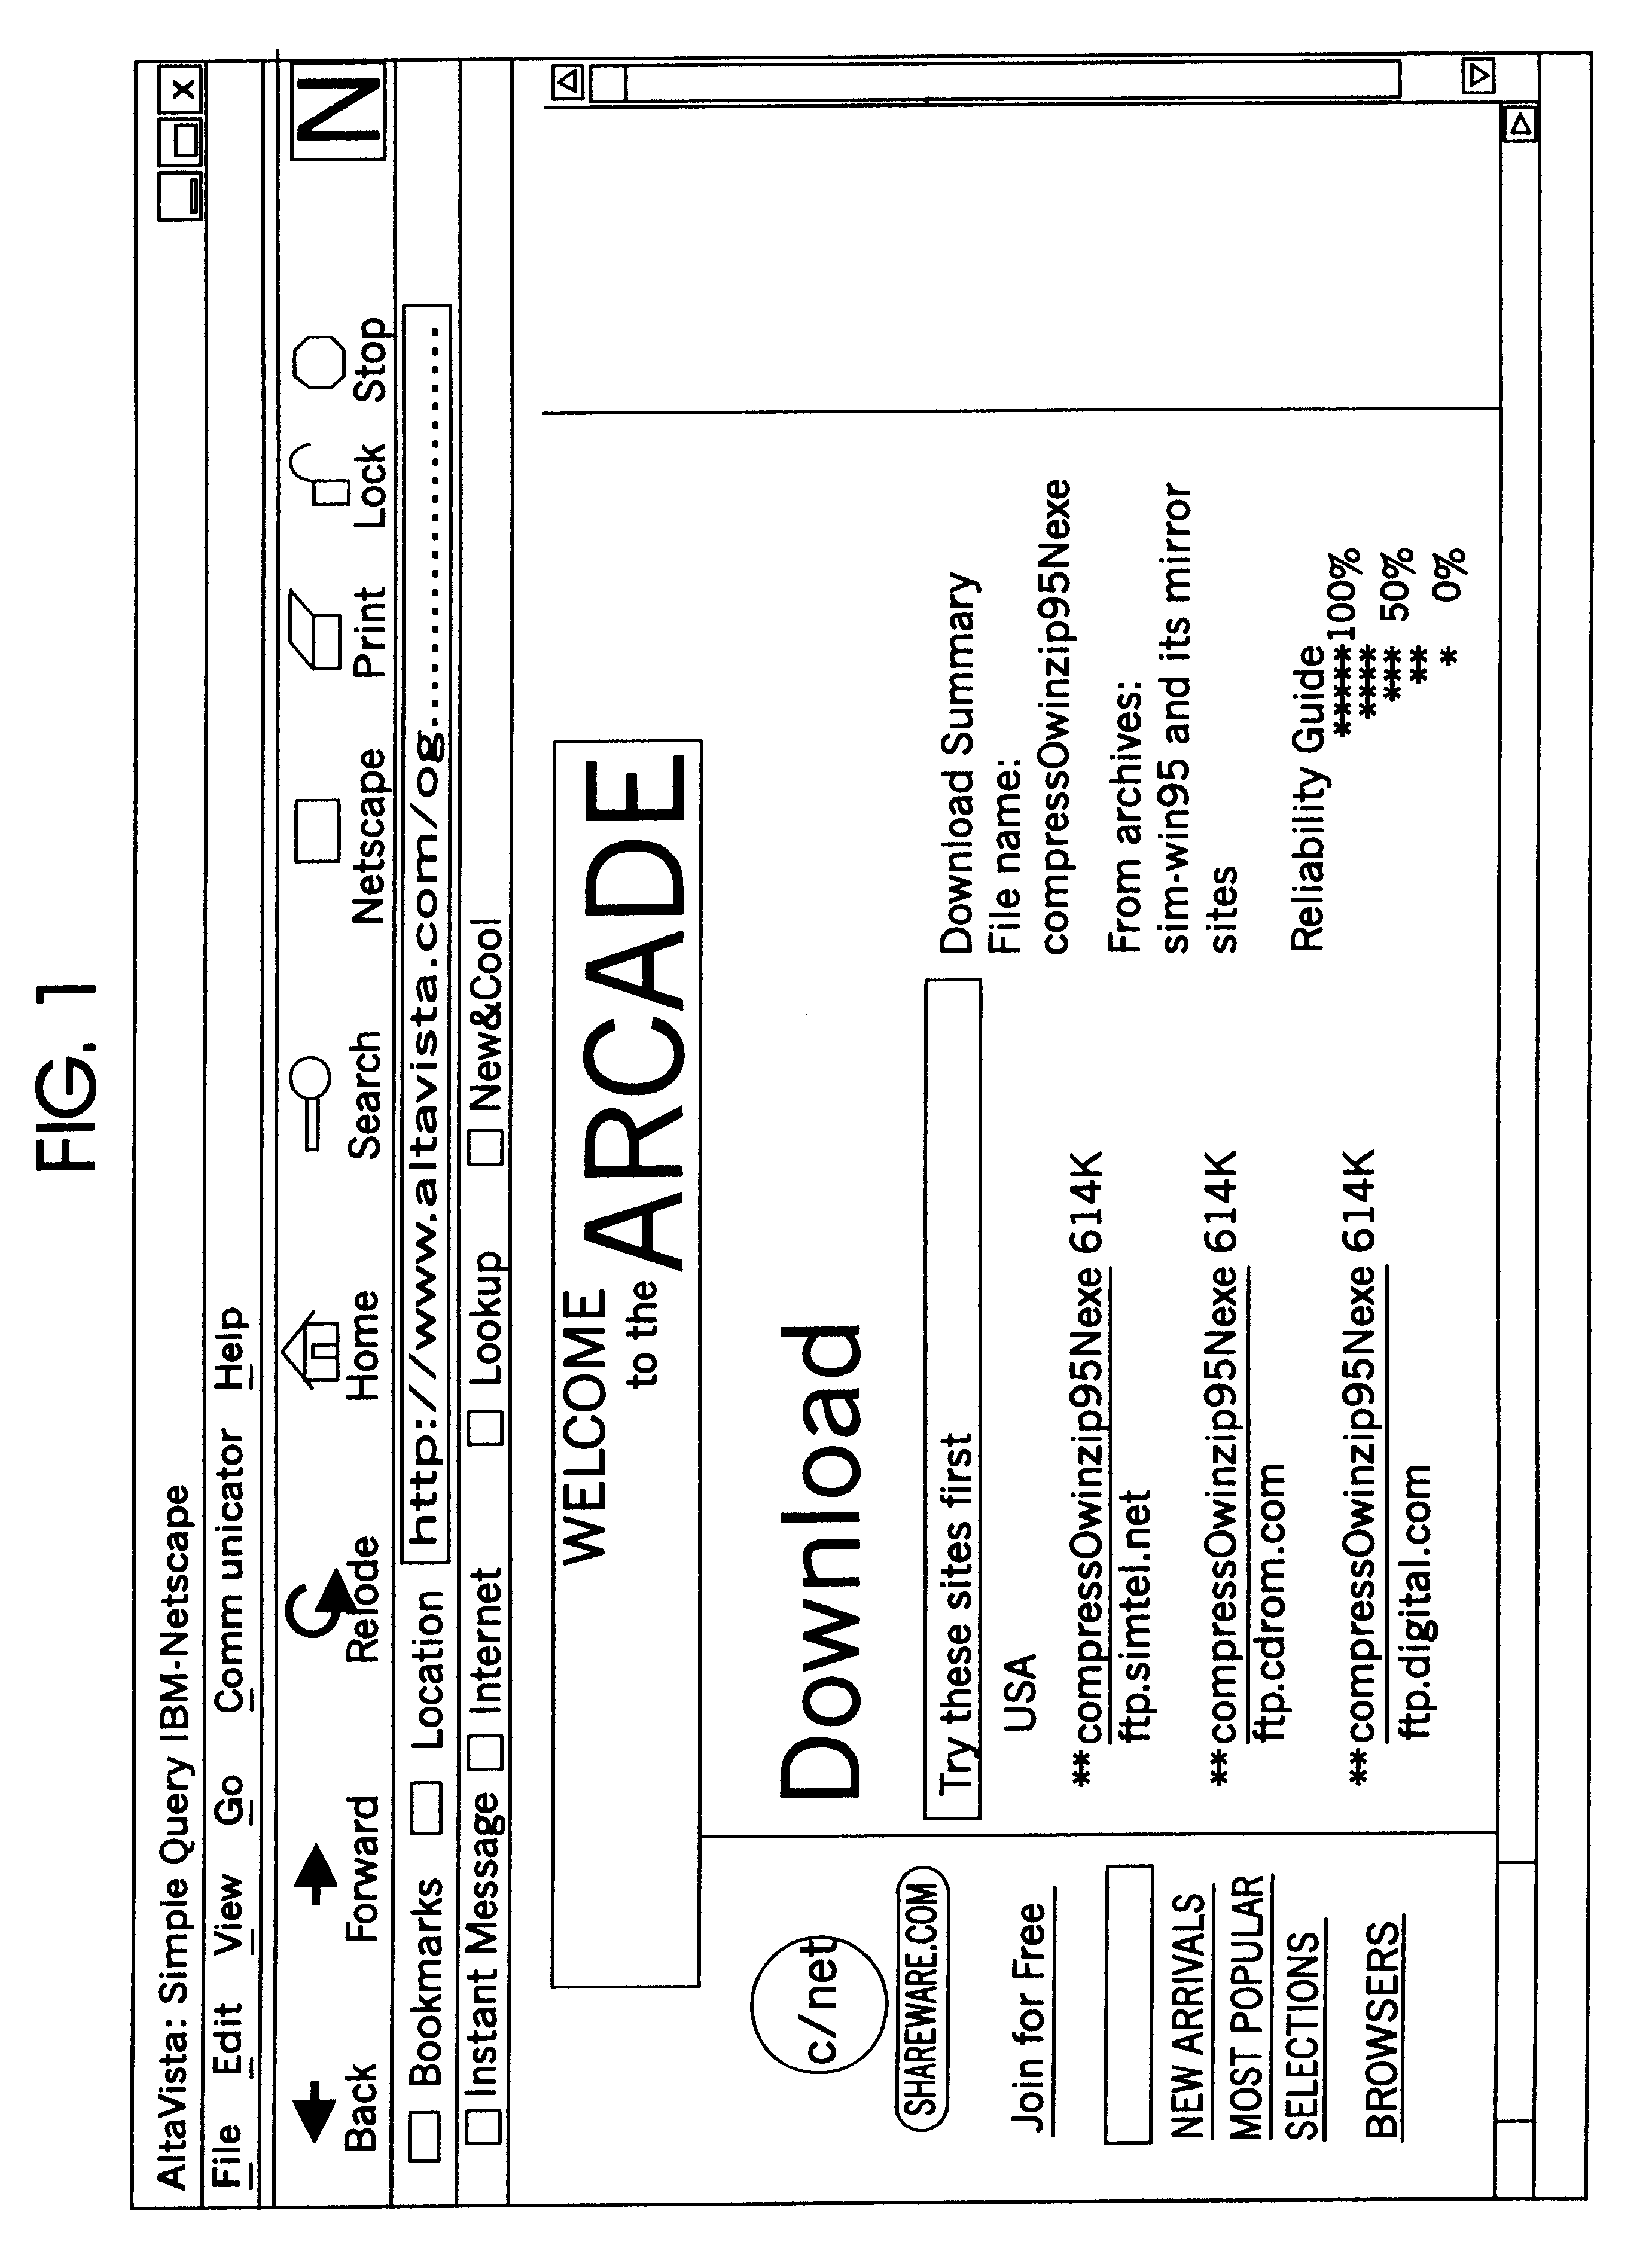 System and method for ascertaining an displaying connection-related performance data in networks